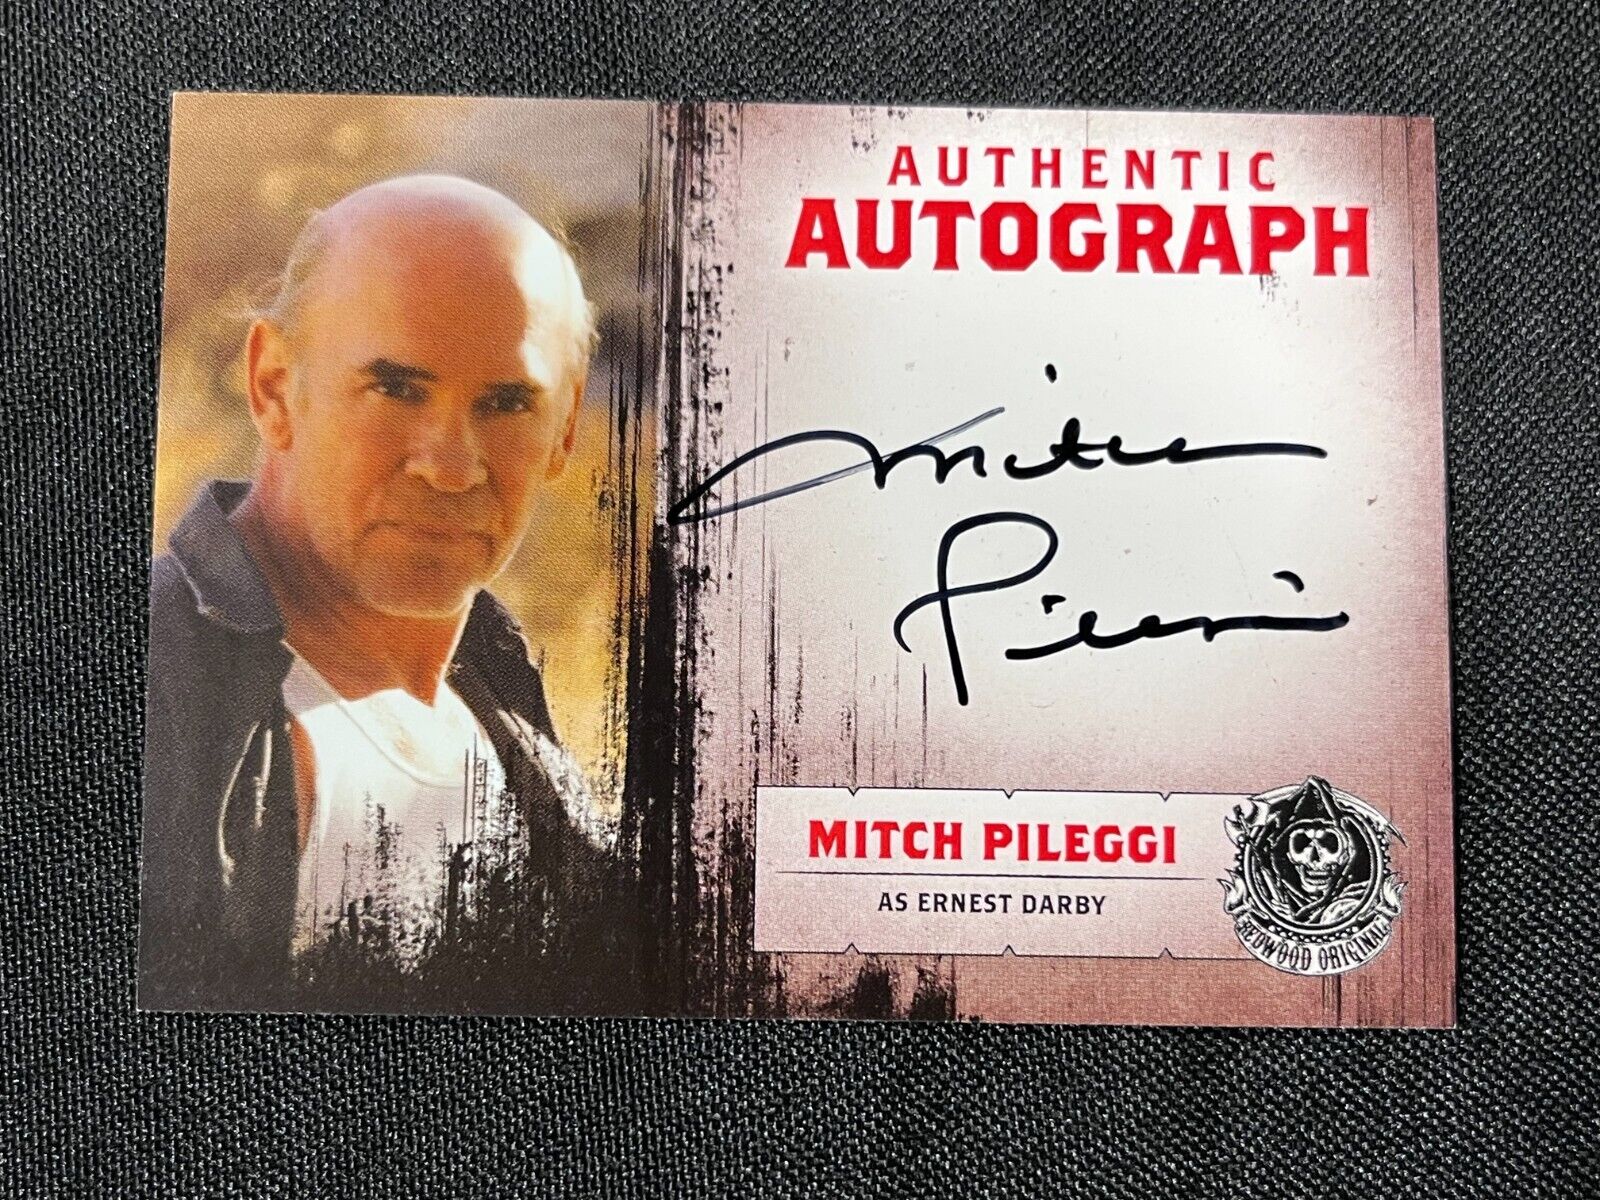 2014 Cryptozoic Sons of Anarchy Mitch Pileggi Ernest Darby A17 Autograph Card AA